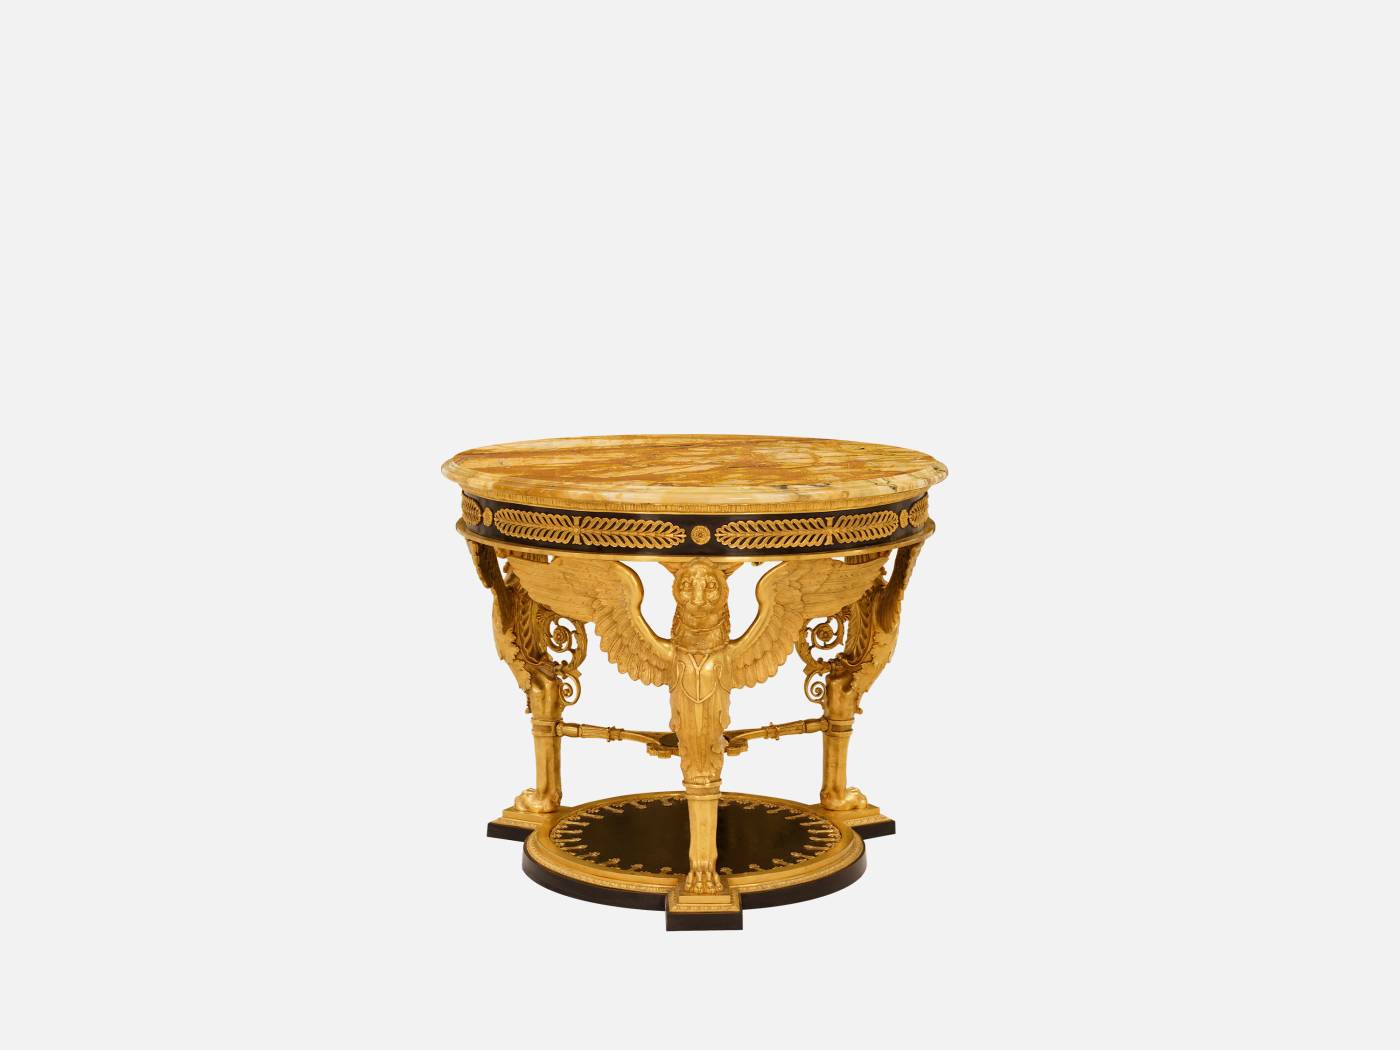 ART. 2182 – C.G. Capelletti Italian Luxury Classic Small tables. Transform your space with sophisticated made in italy classic interior design.